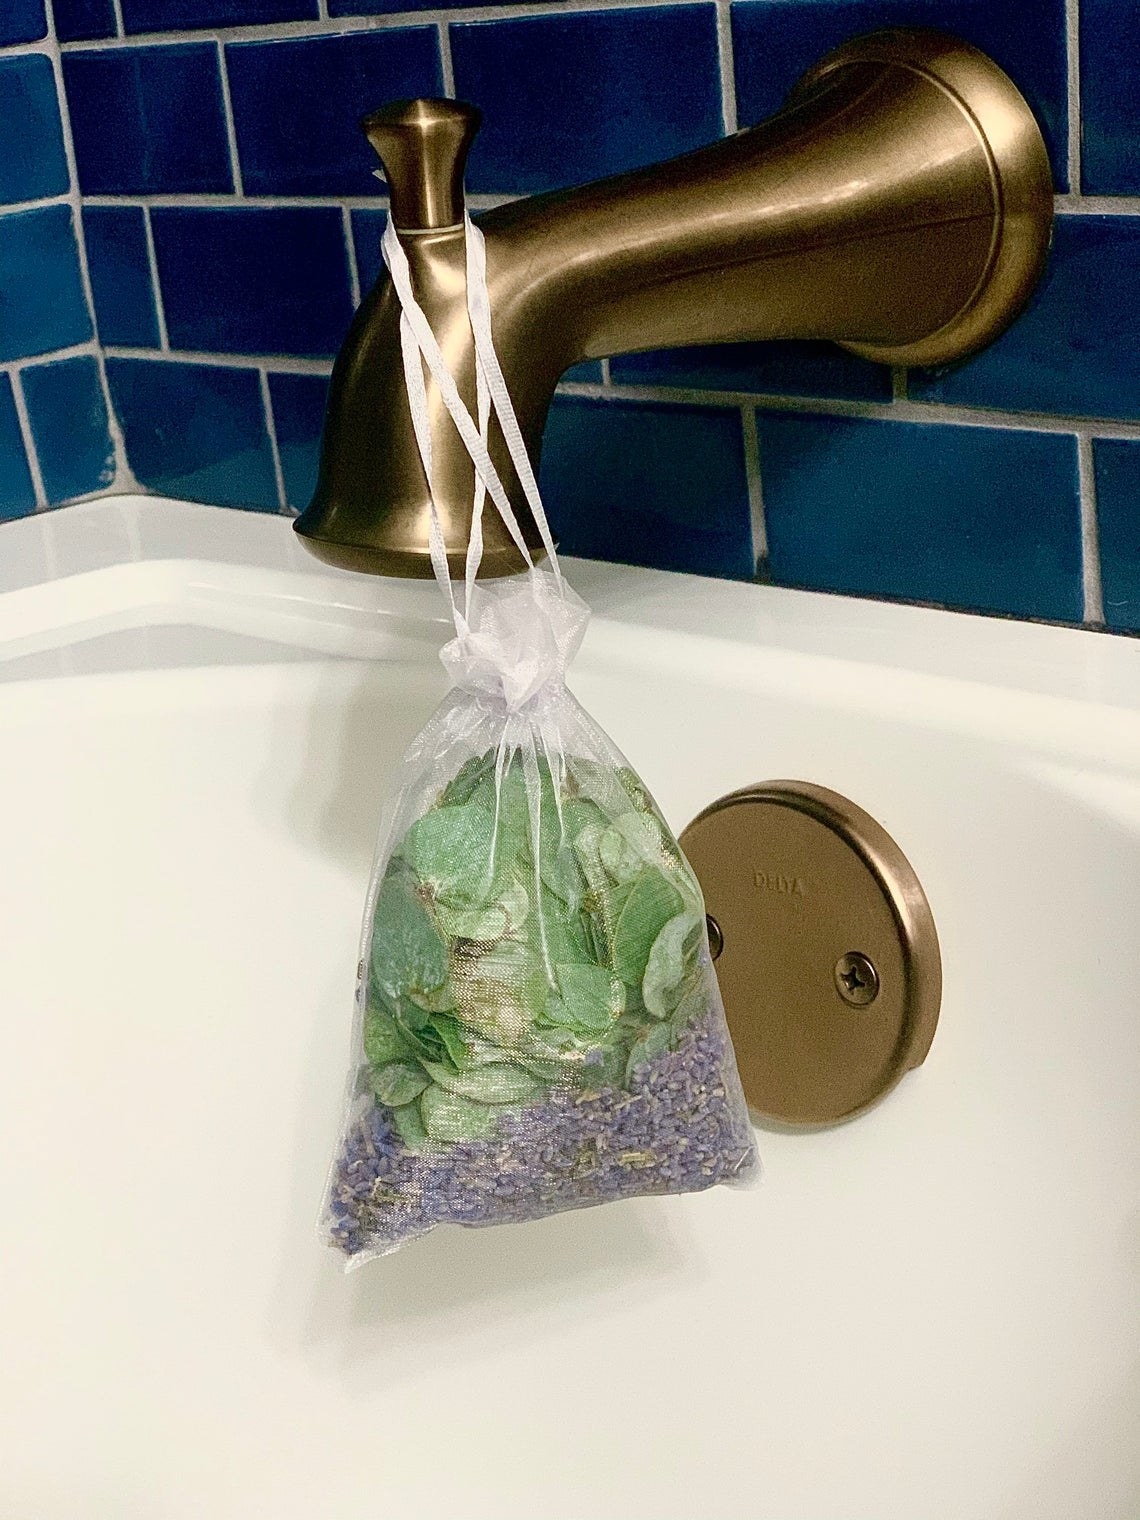 Small satchel of dried eucalyptus and lavender hanging from a bathtub spout 